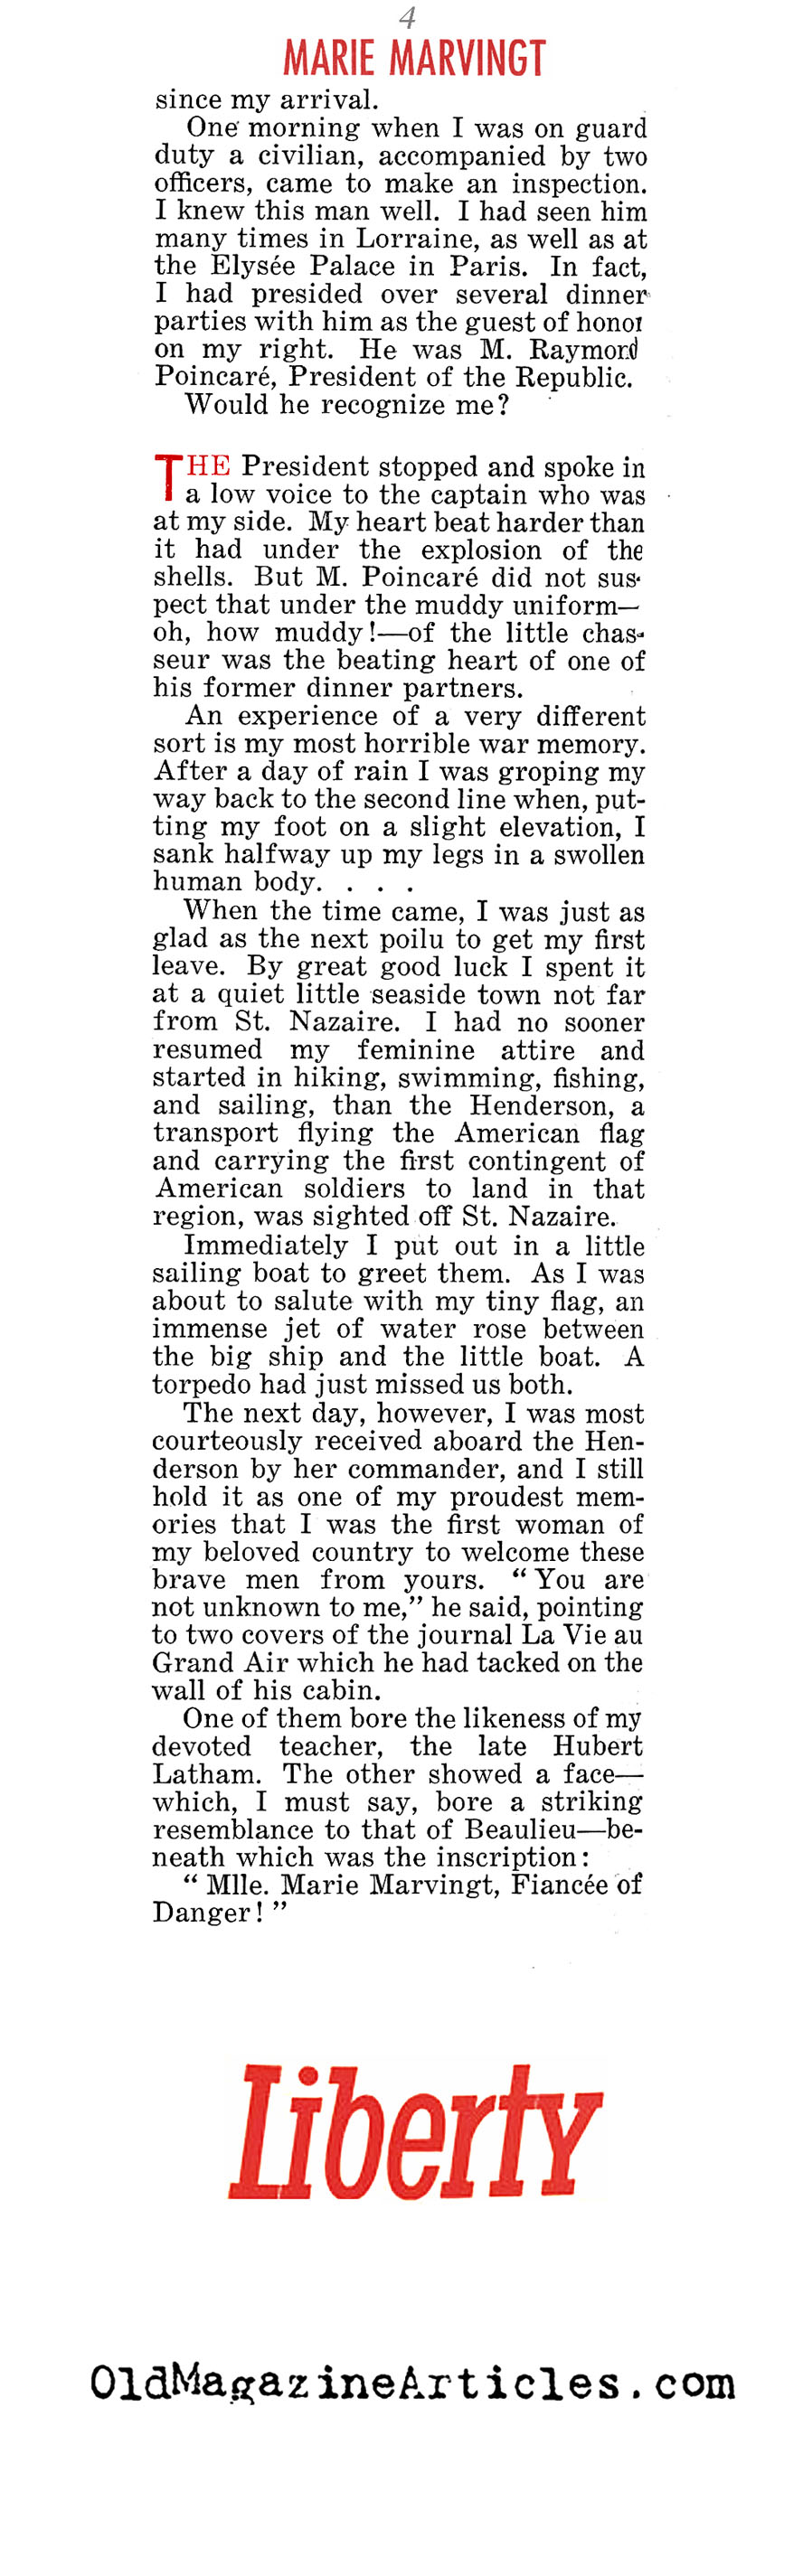 She Fought in the Trenches (Liberty Magazine, 1938)